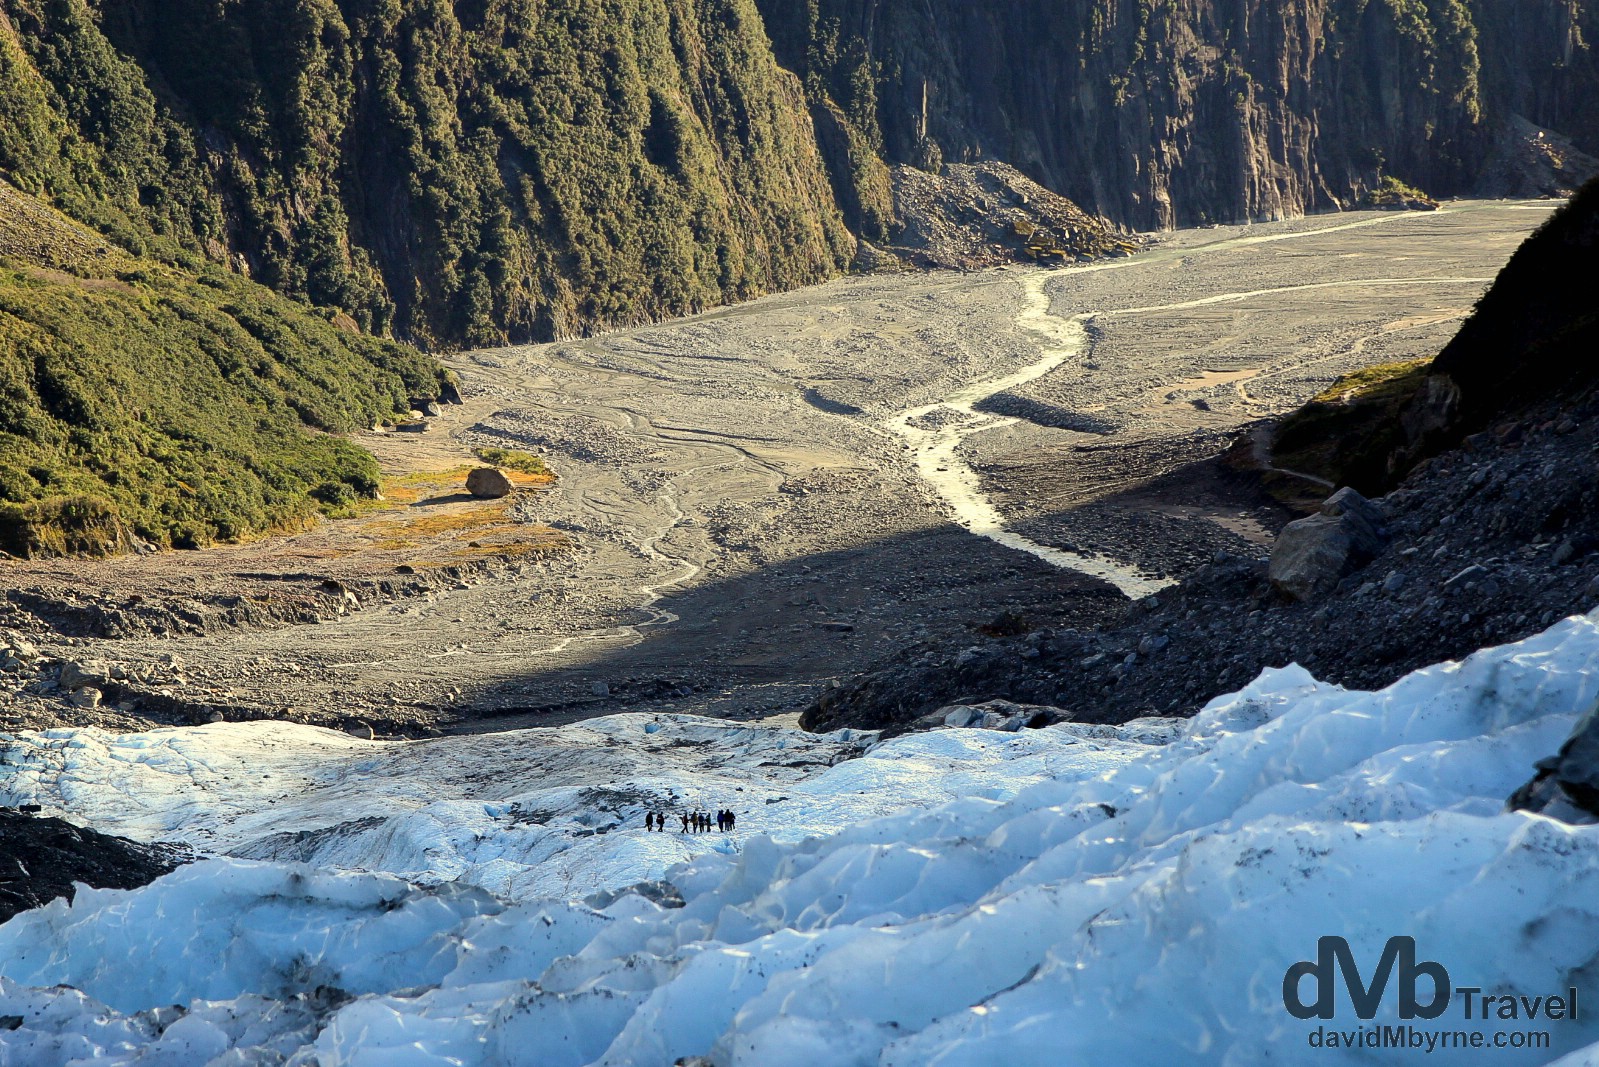 Distant figures descending the Fox Glacier, South Island, New Zealand. May 19th 2012.